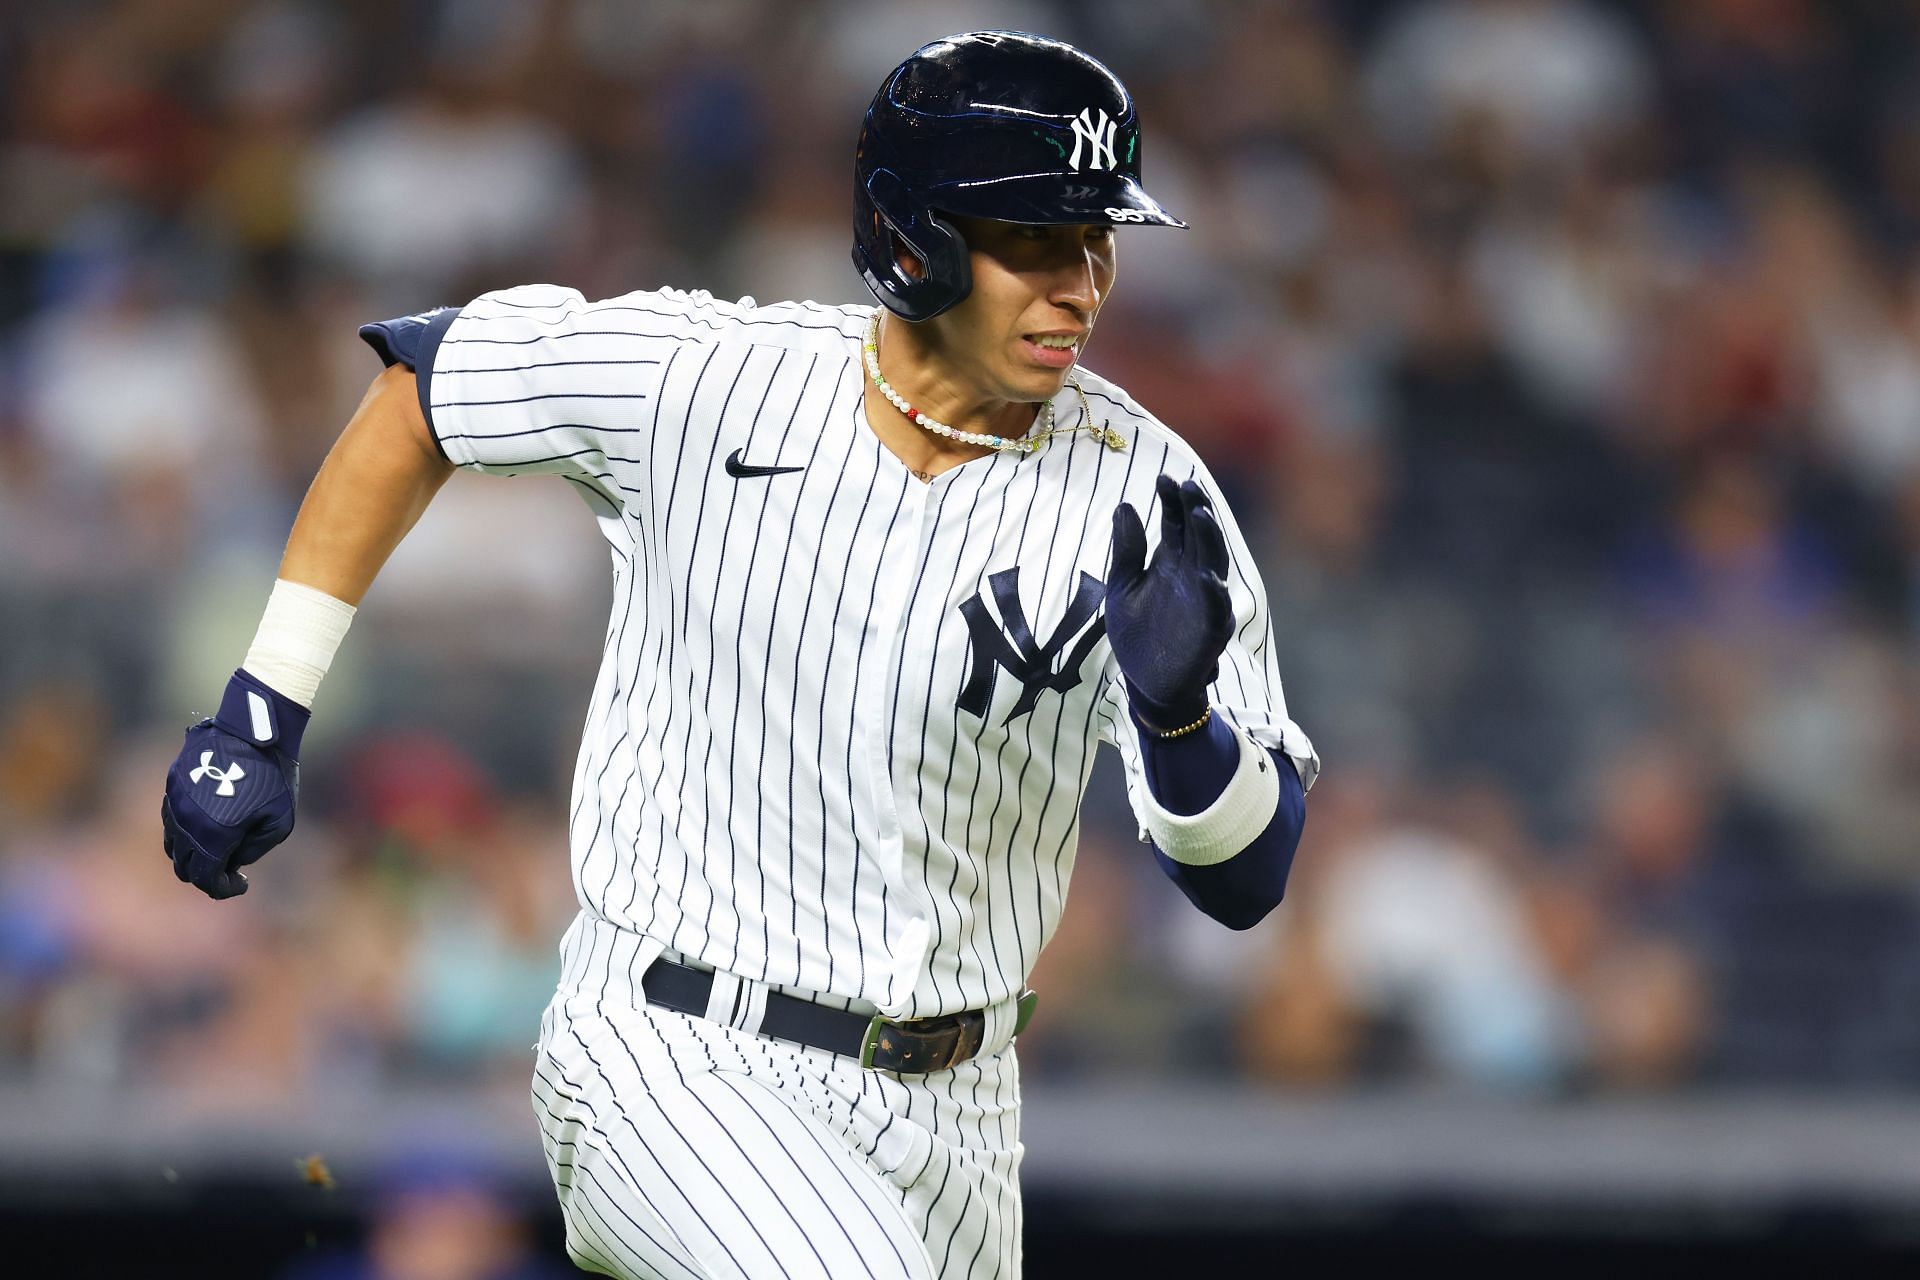 New York Yankees rookie Oswaldo Cabrera is making a great first impression during his first week in MLB